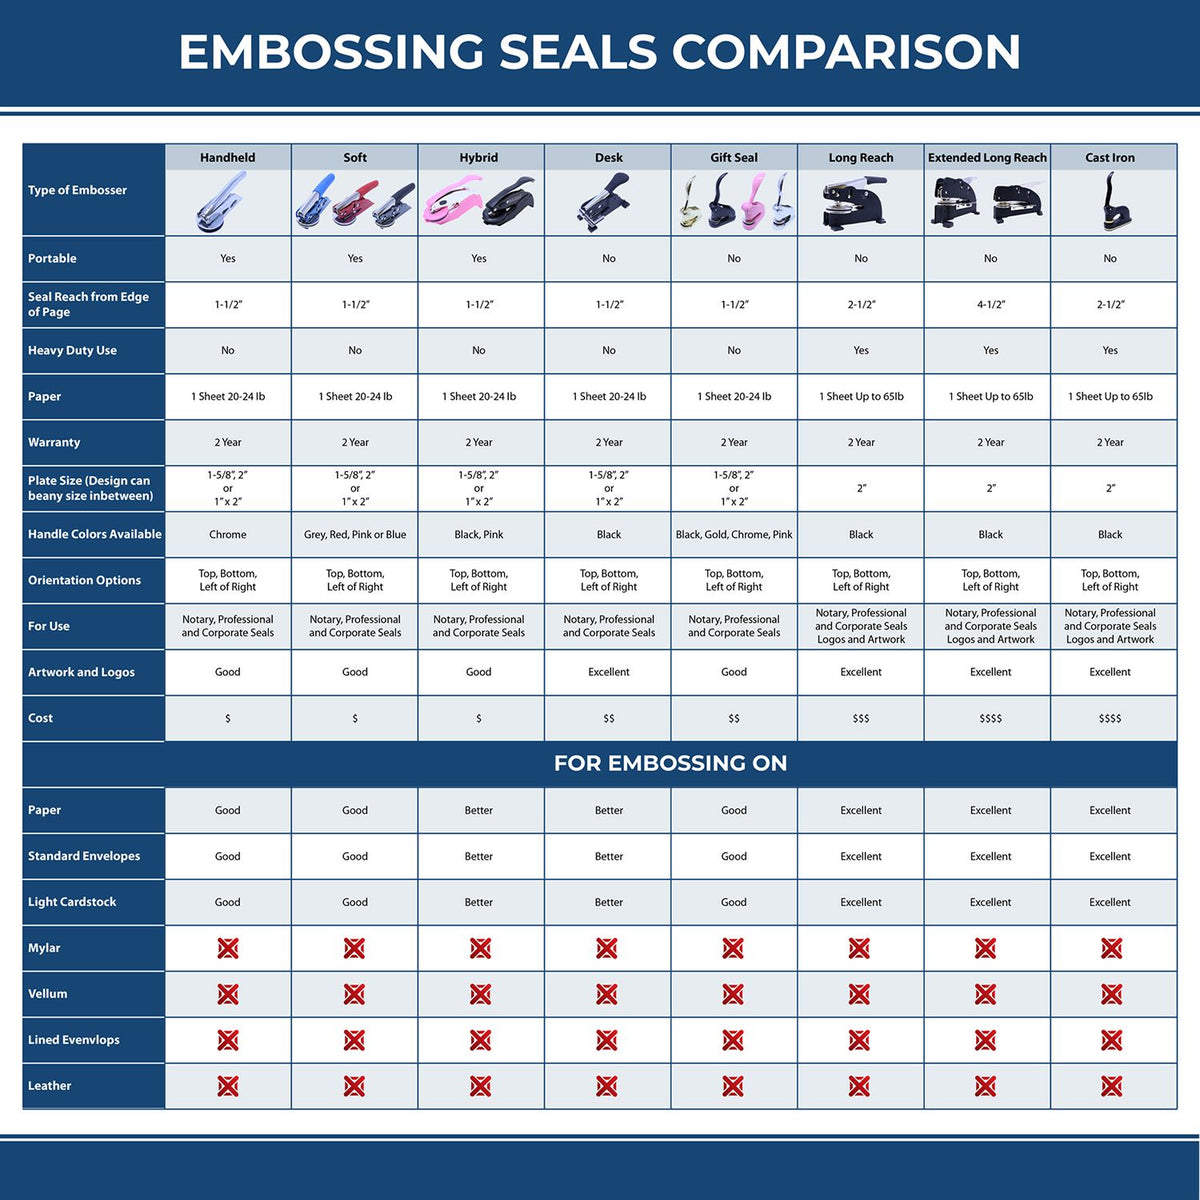 A comparison chart for the different types of mount models available for the State of Montana Extended Long Reach Geologist Seal